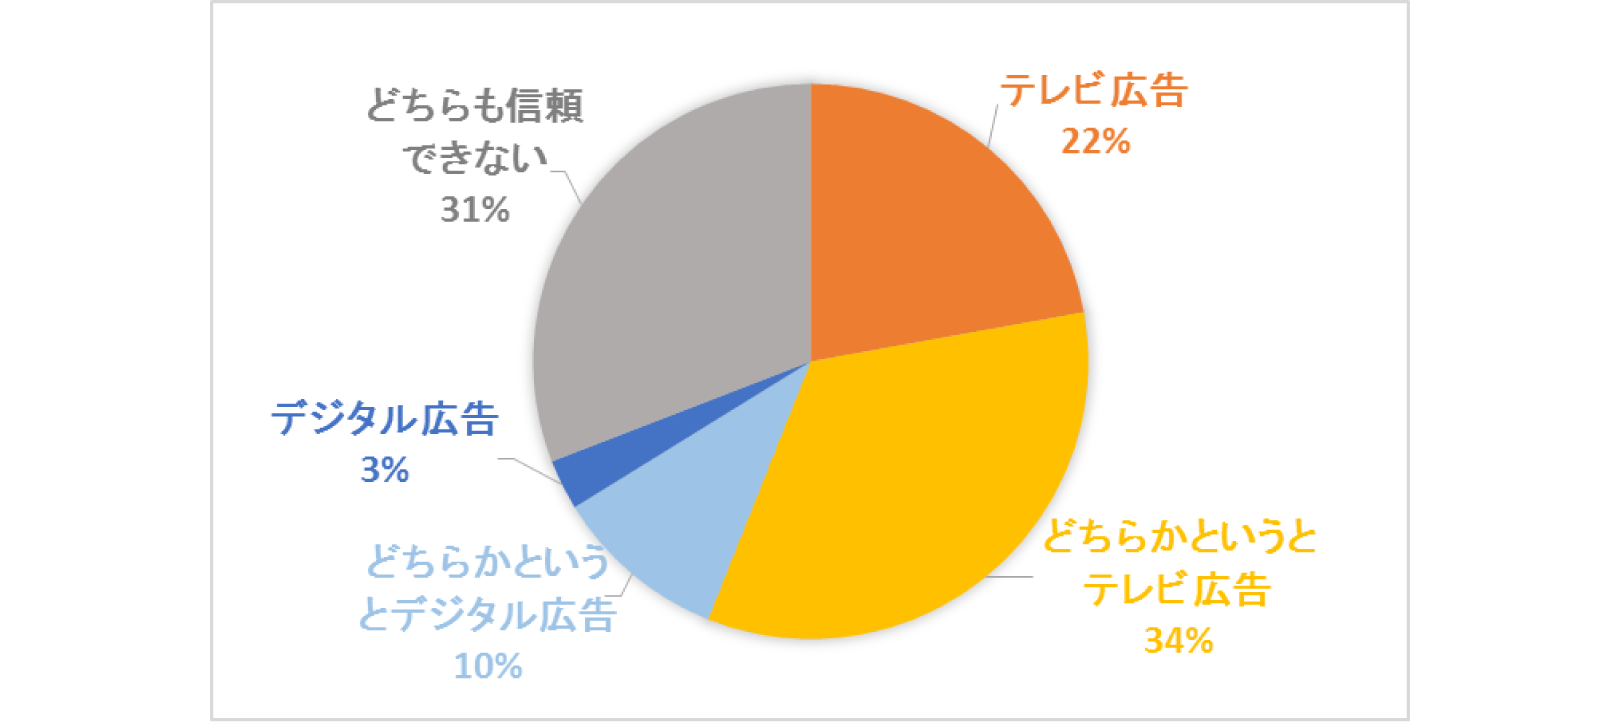 201809-19-fig-01.png